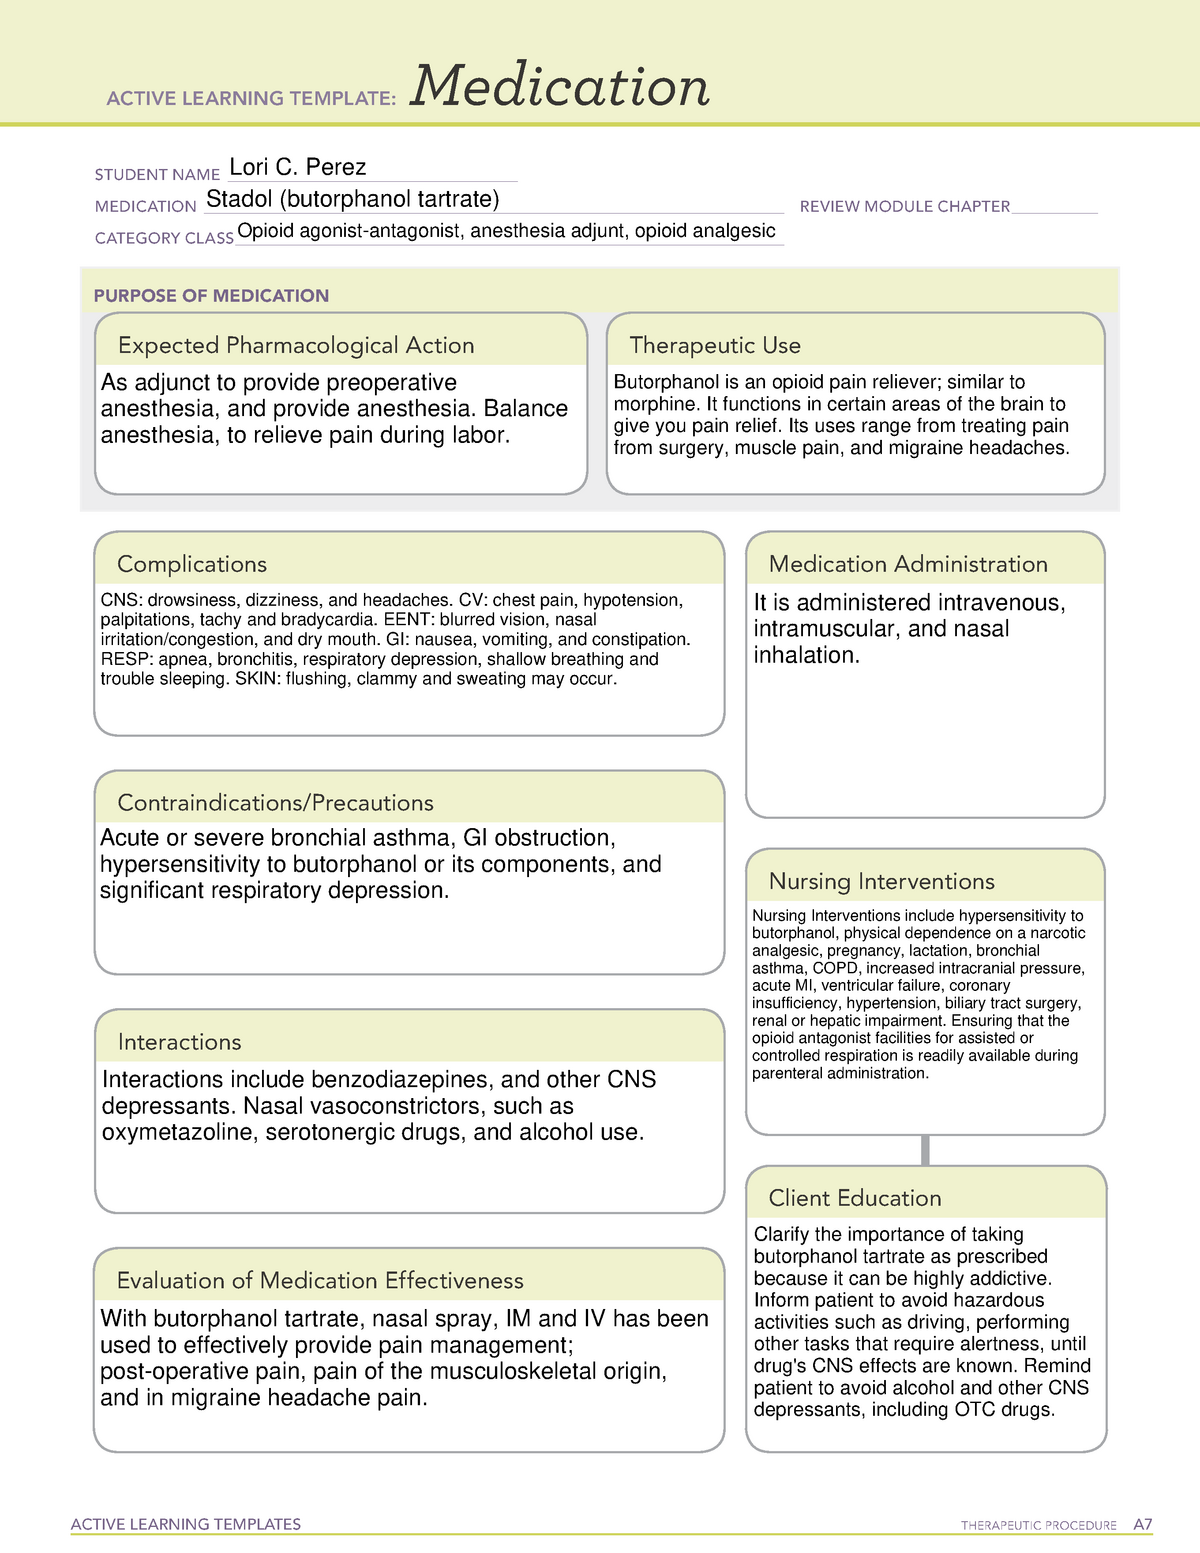 Med Card - Butorphanol - Completed template - ACTIVE LEARNING TEMPLATES ...